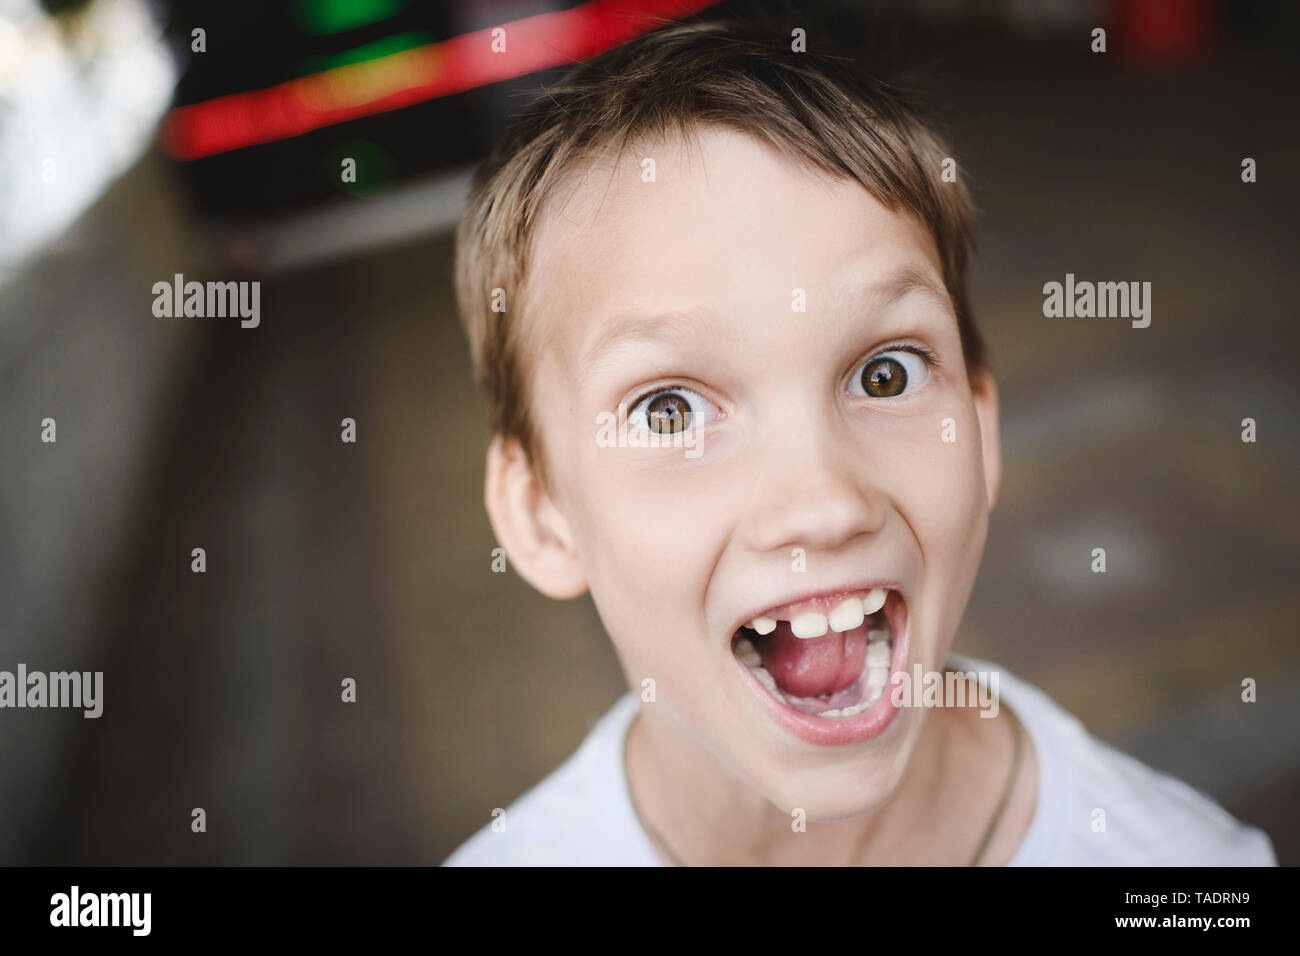 Portrait of excited boy screaming Stock Photo